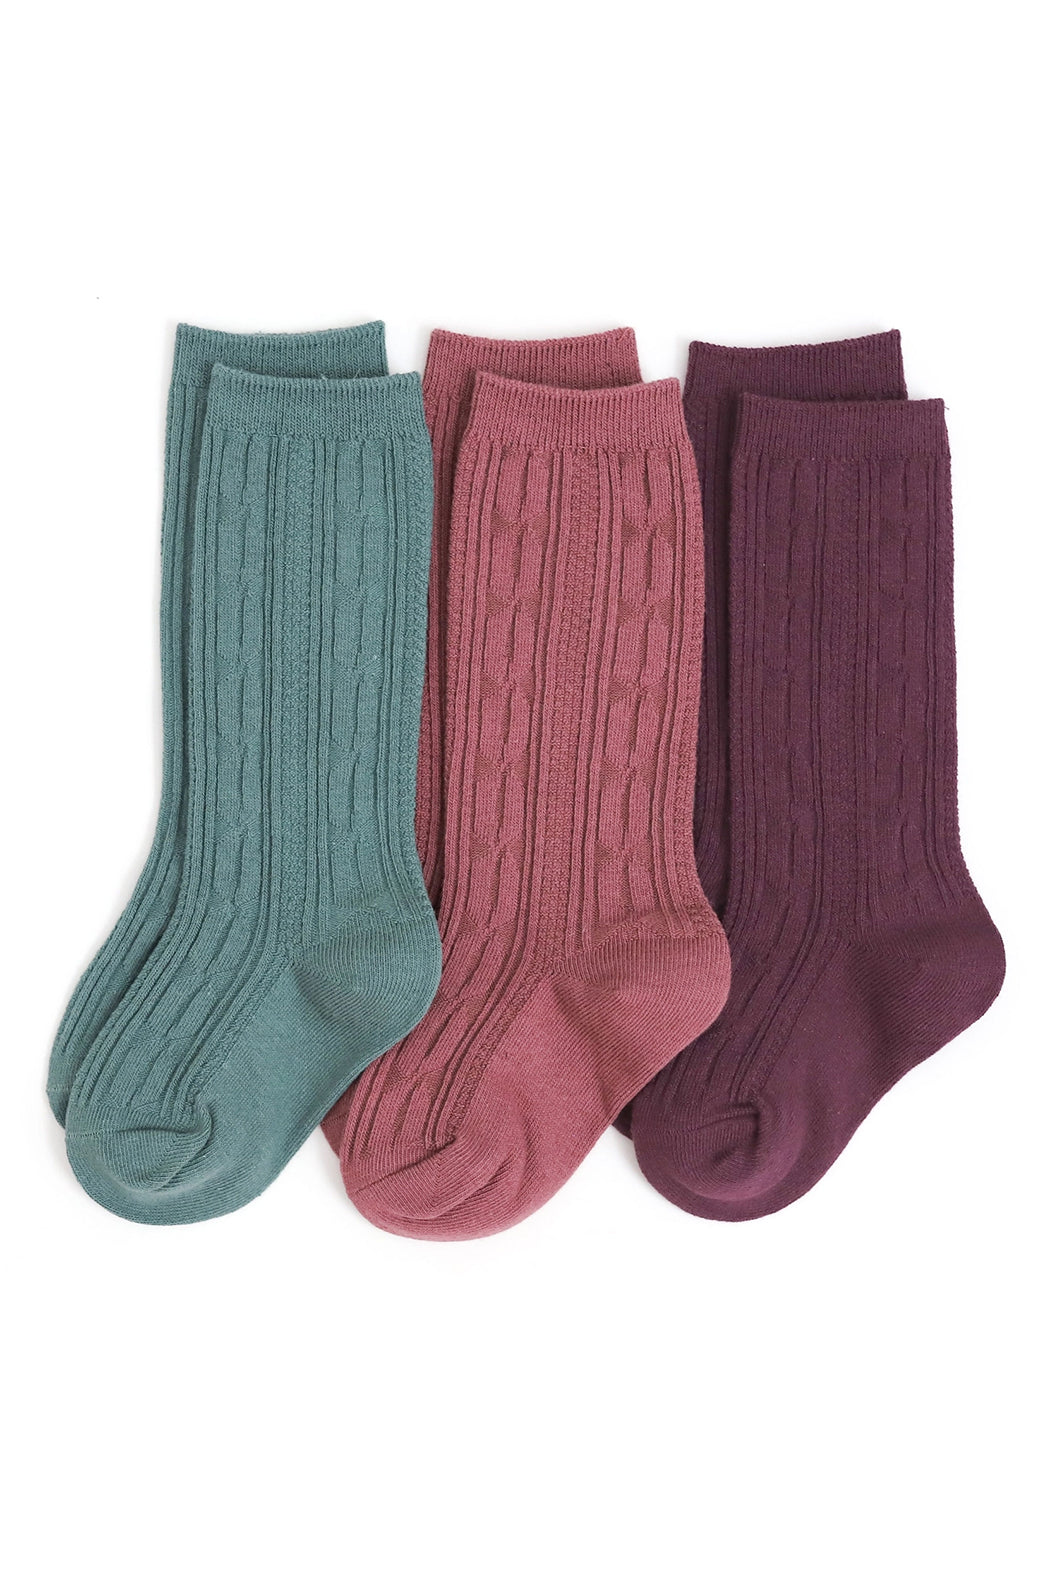 Little Stocking Co Denali Cable Knit Socks - 3 Pack